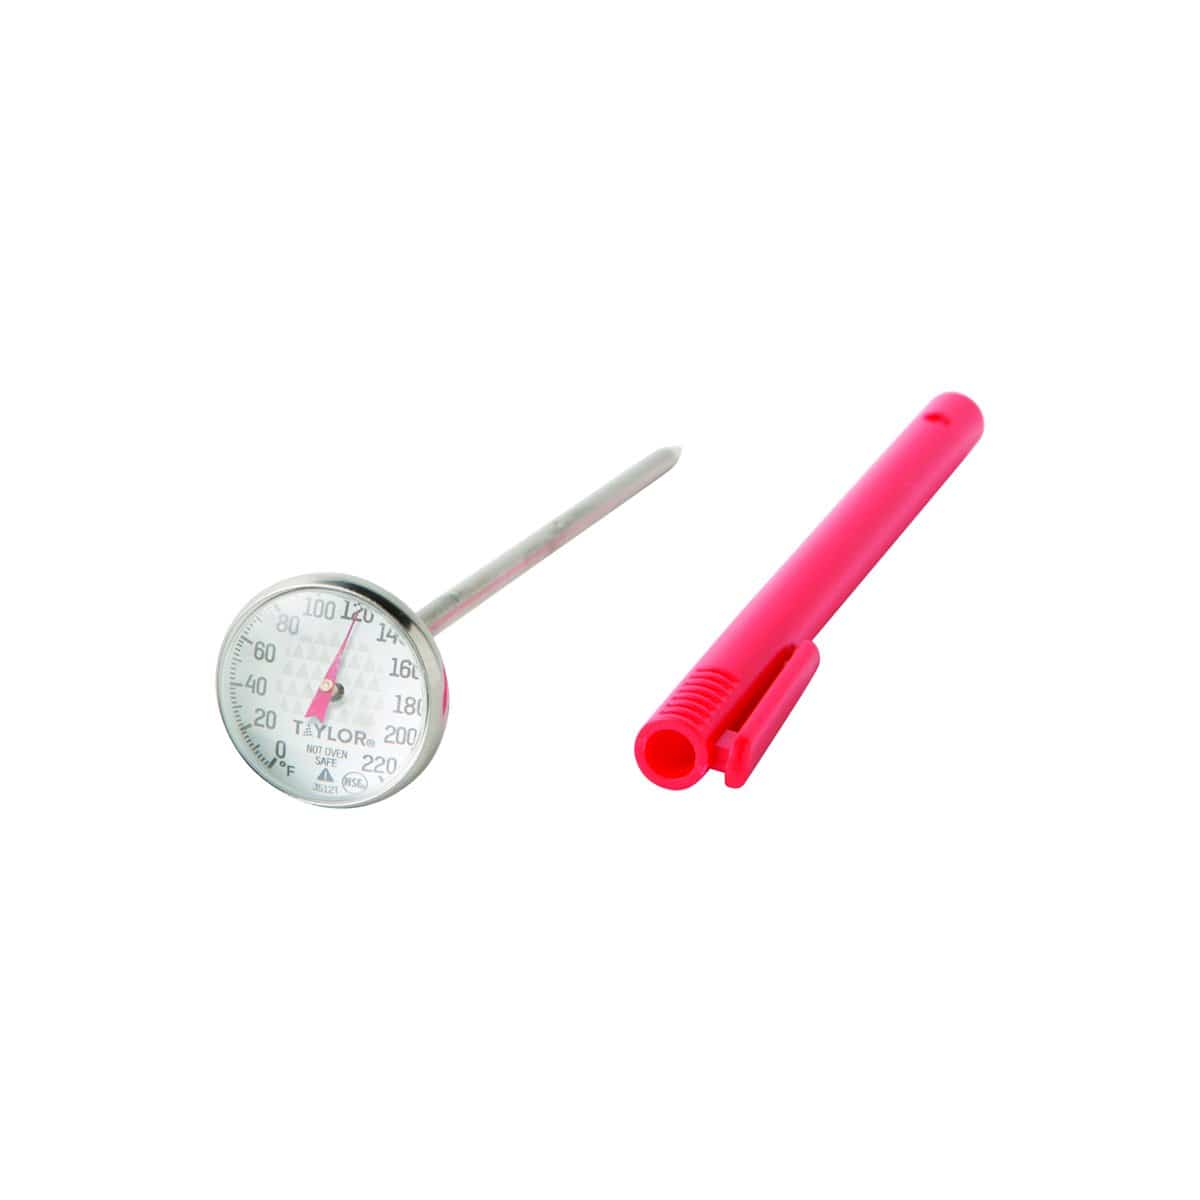 Taylor Digital Instant-Read Pocket Kitchen Meat Cooking Thermometer